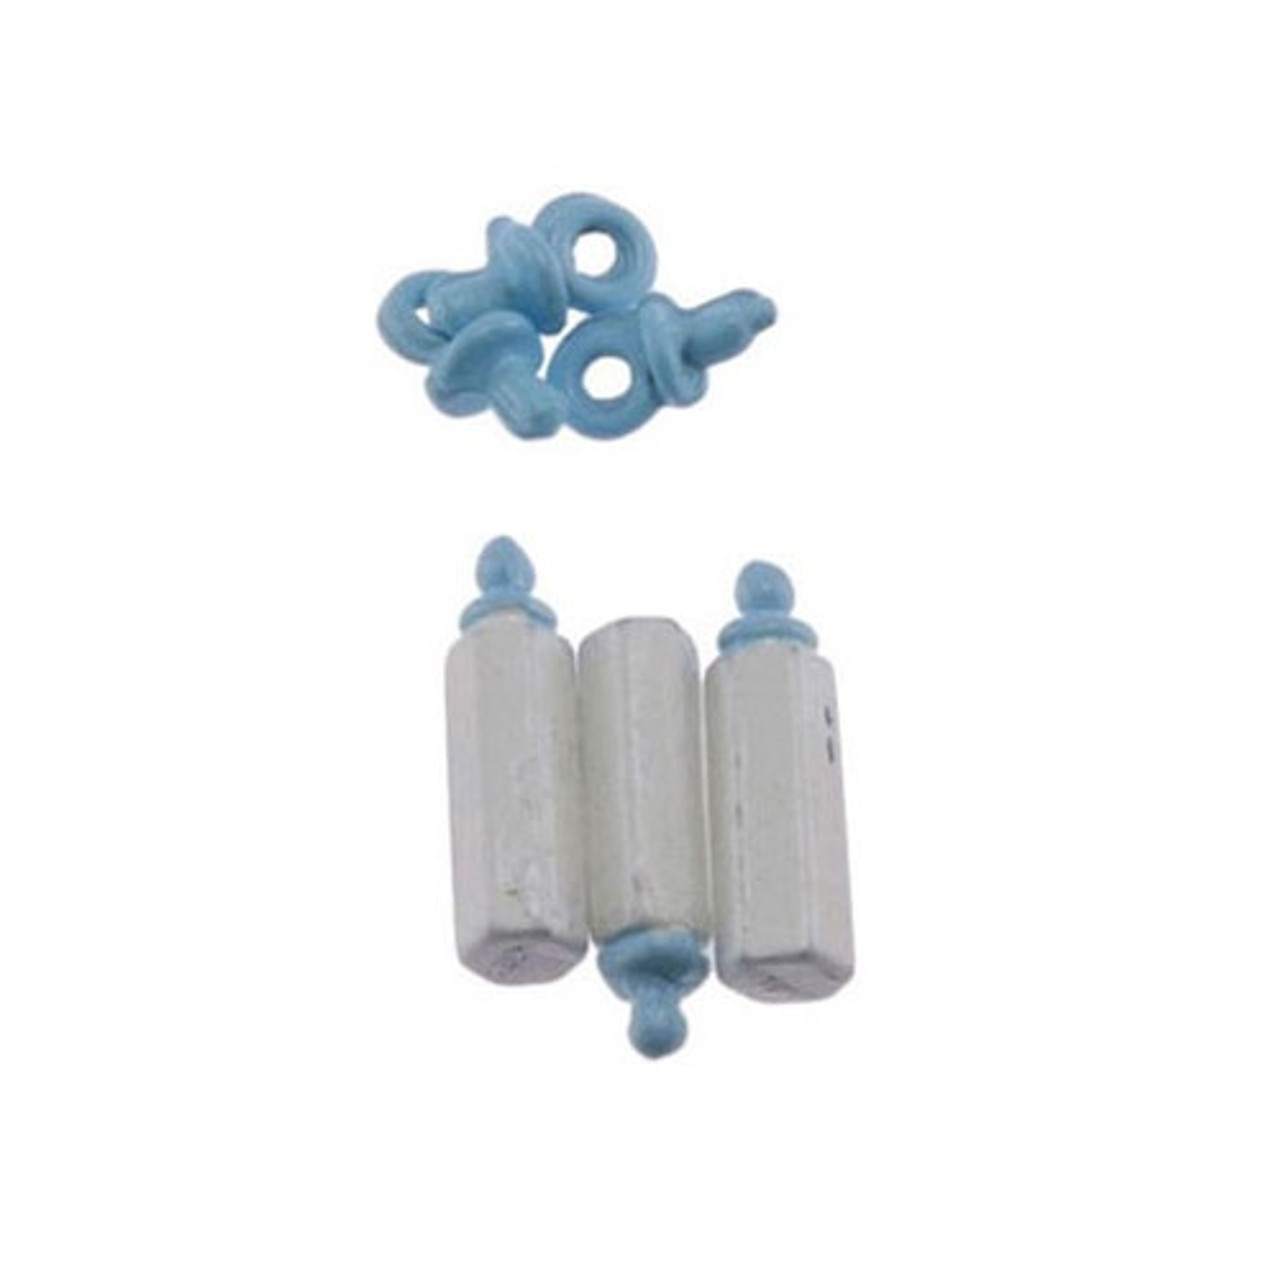 Alternate view of blue pacifiers and bottles